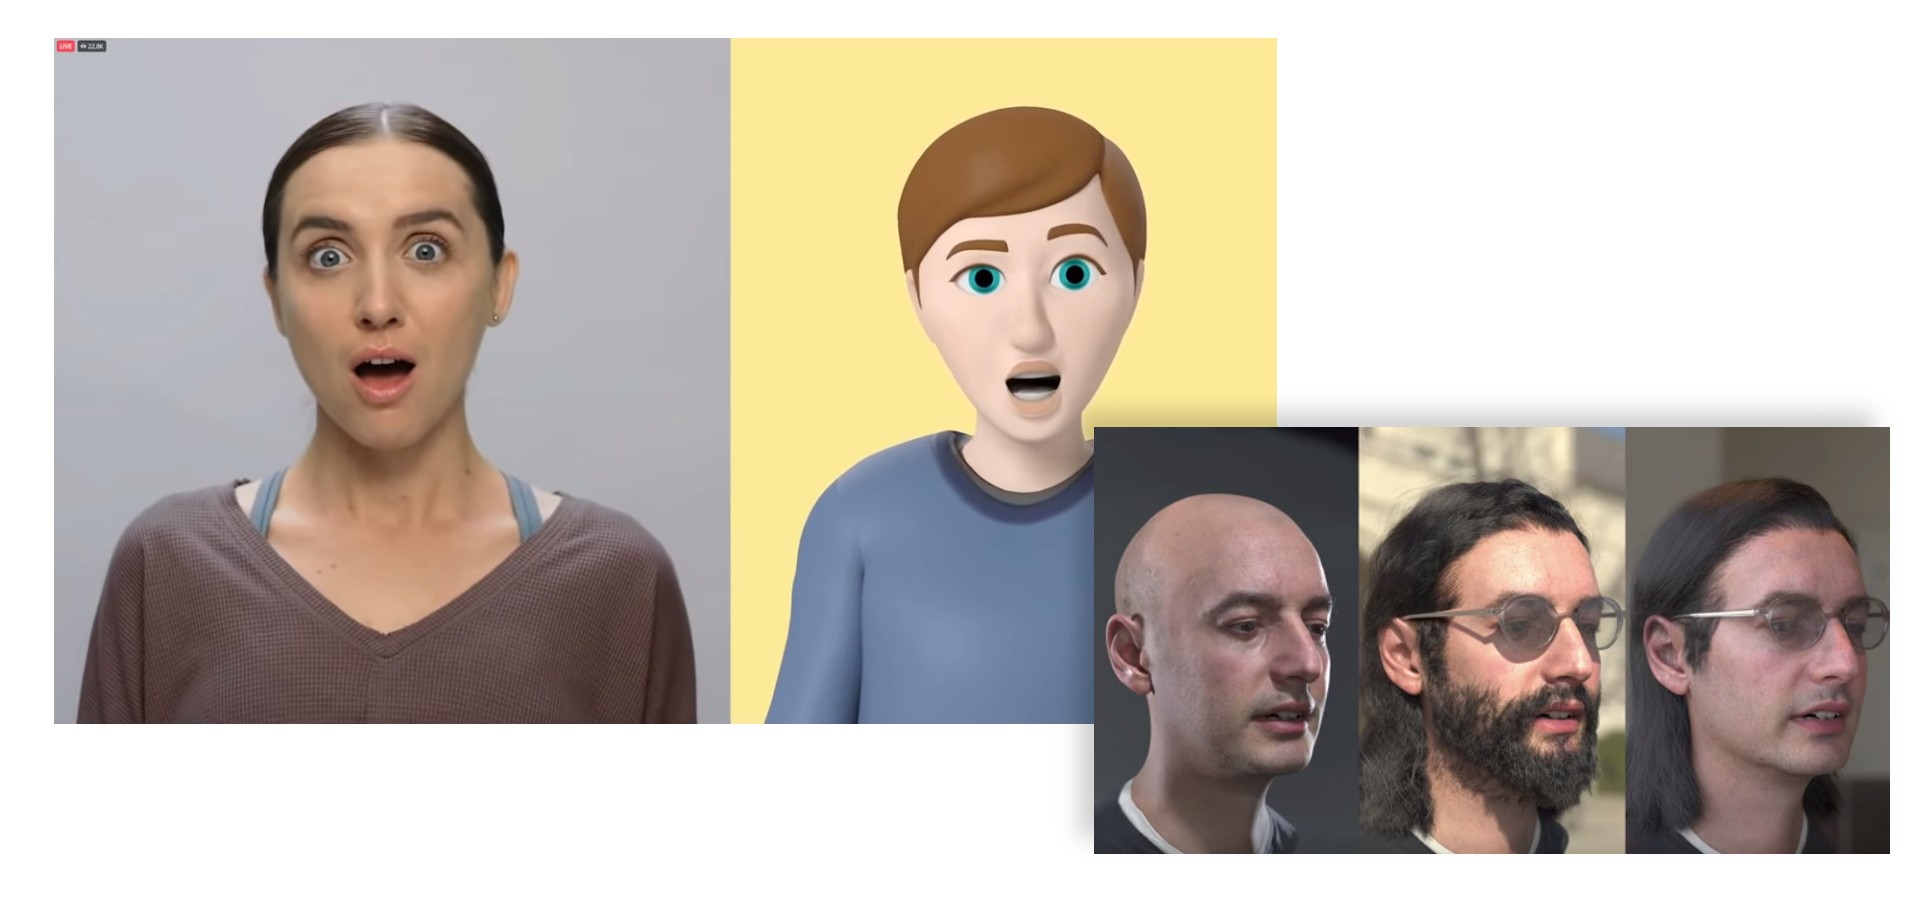 Various avatars with digitally altered features. Sources: Meta Reality Lab Research, Hair and Skin Rendering, https://gfycat.com/greenclearfruitfly, and The Metaverse and How SWe’ll Build it Together - Connect 2021, https://www.youtube.com/watch?v=Uv